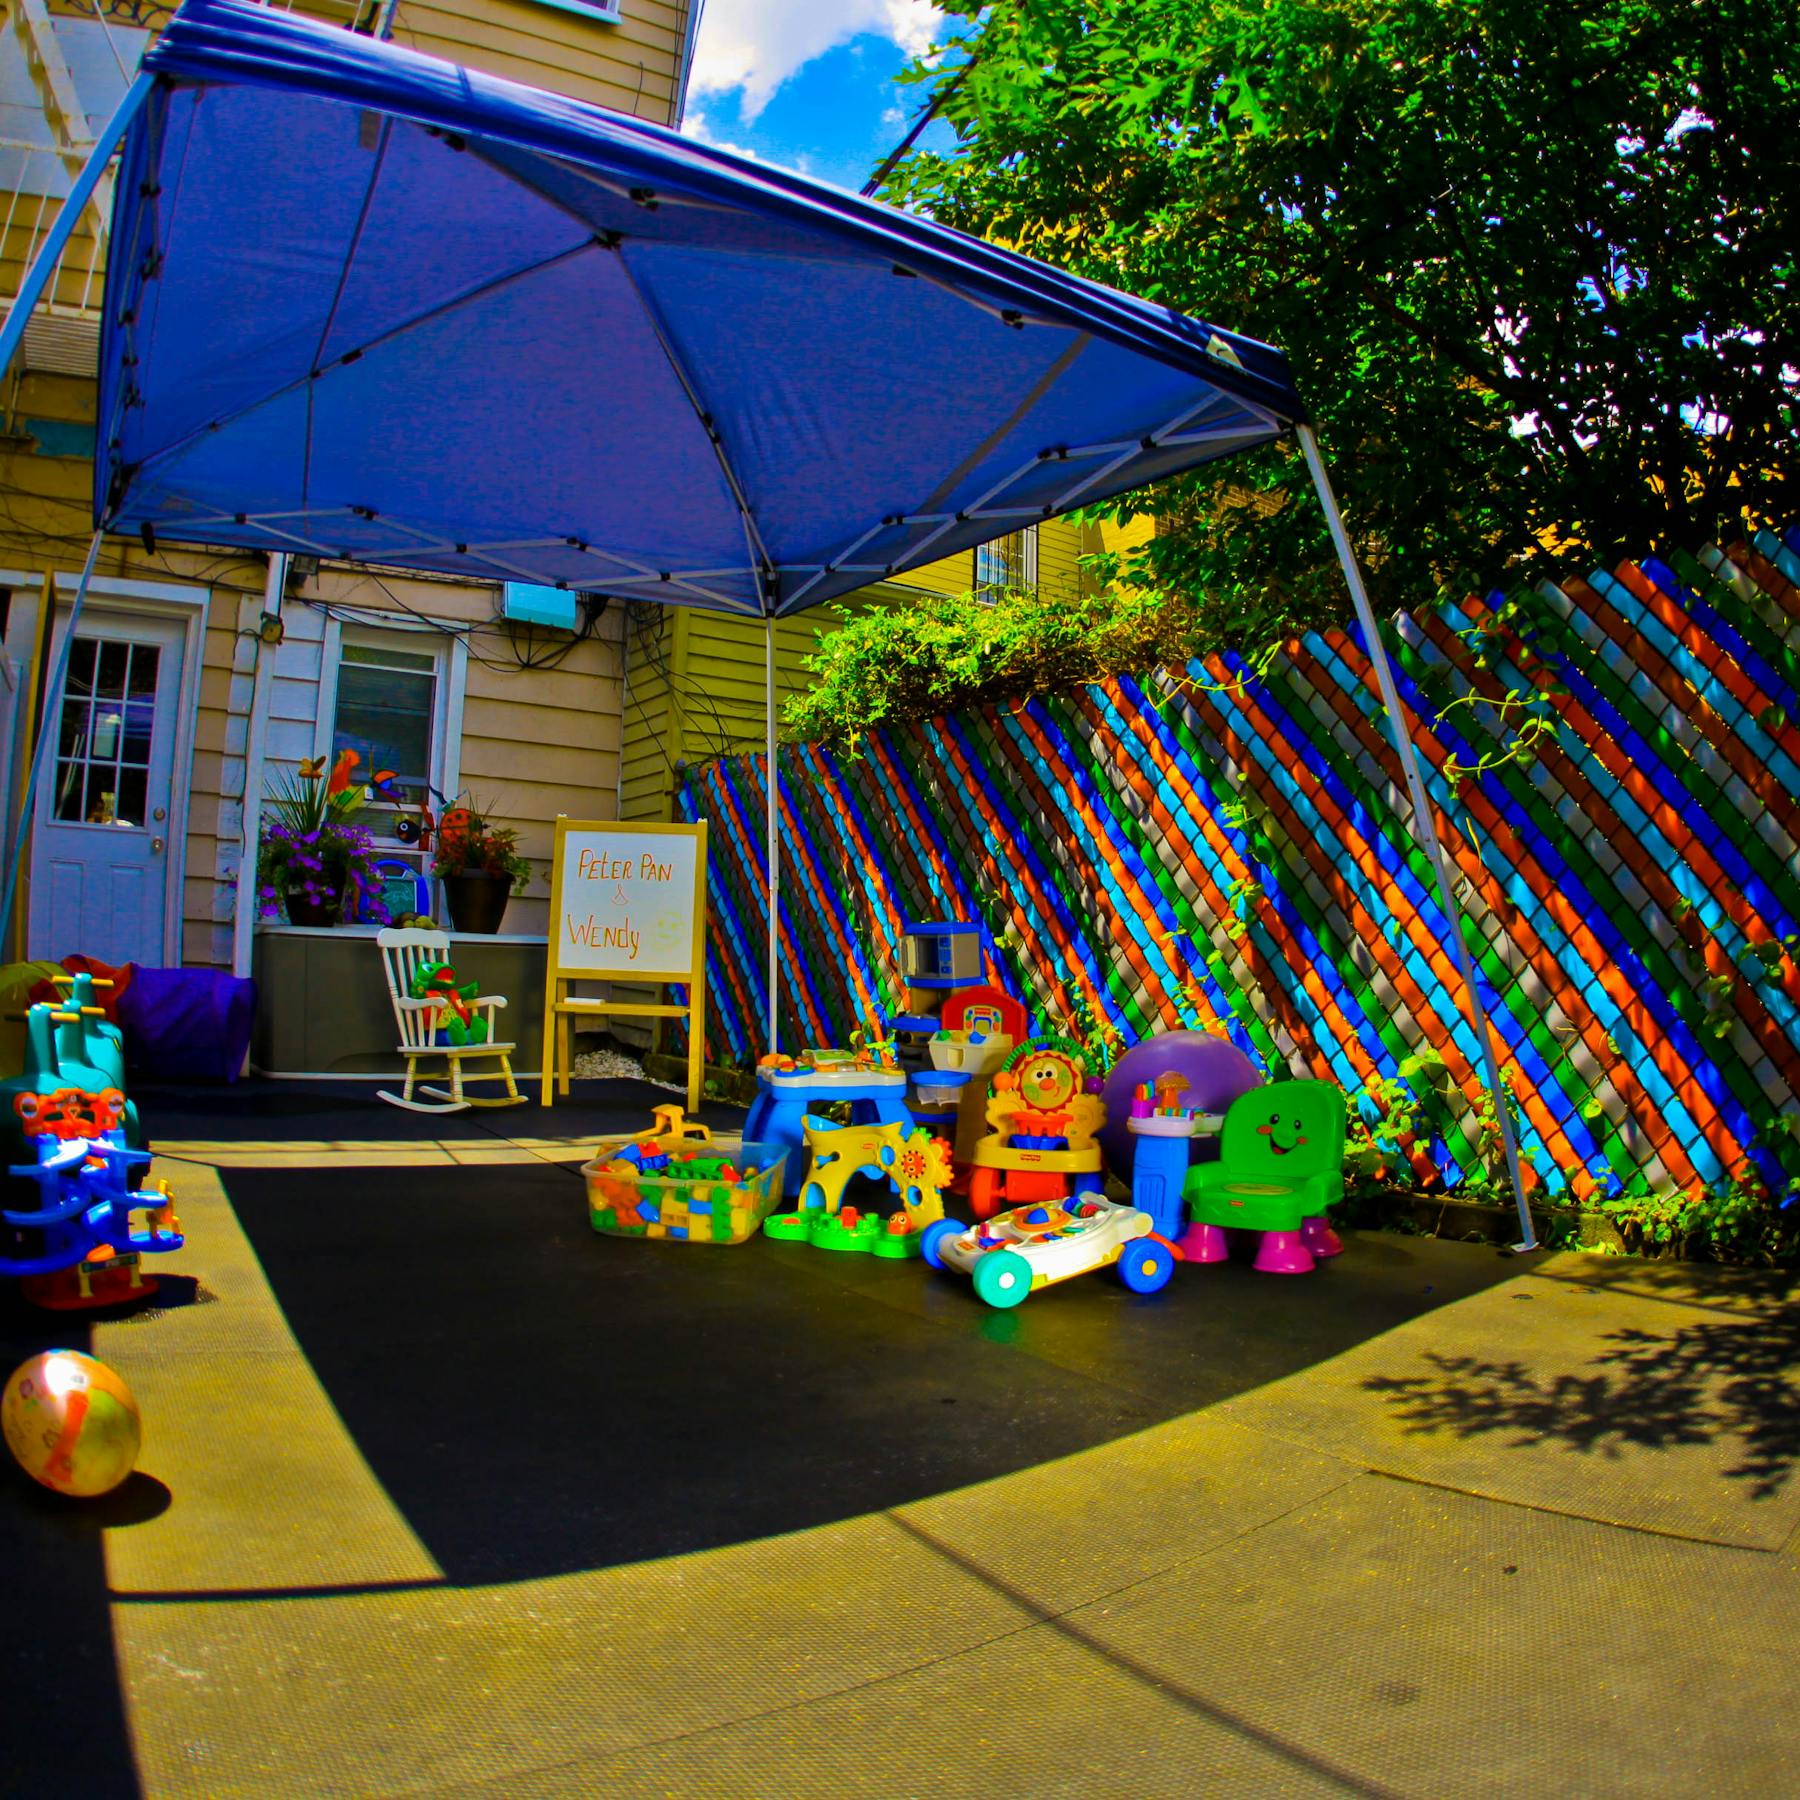 Peter Pan & Wendy Daycare - Daycare in Brooklyn, NY - Winnie